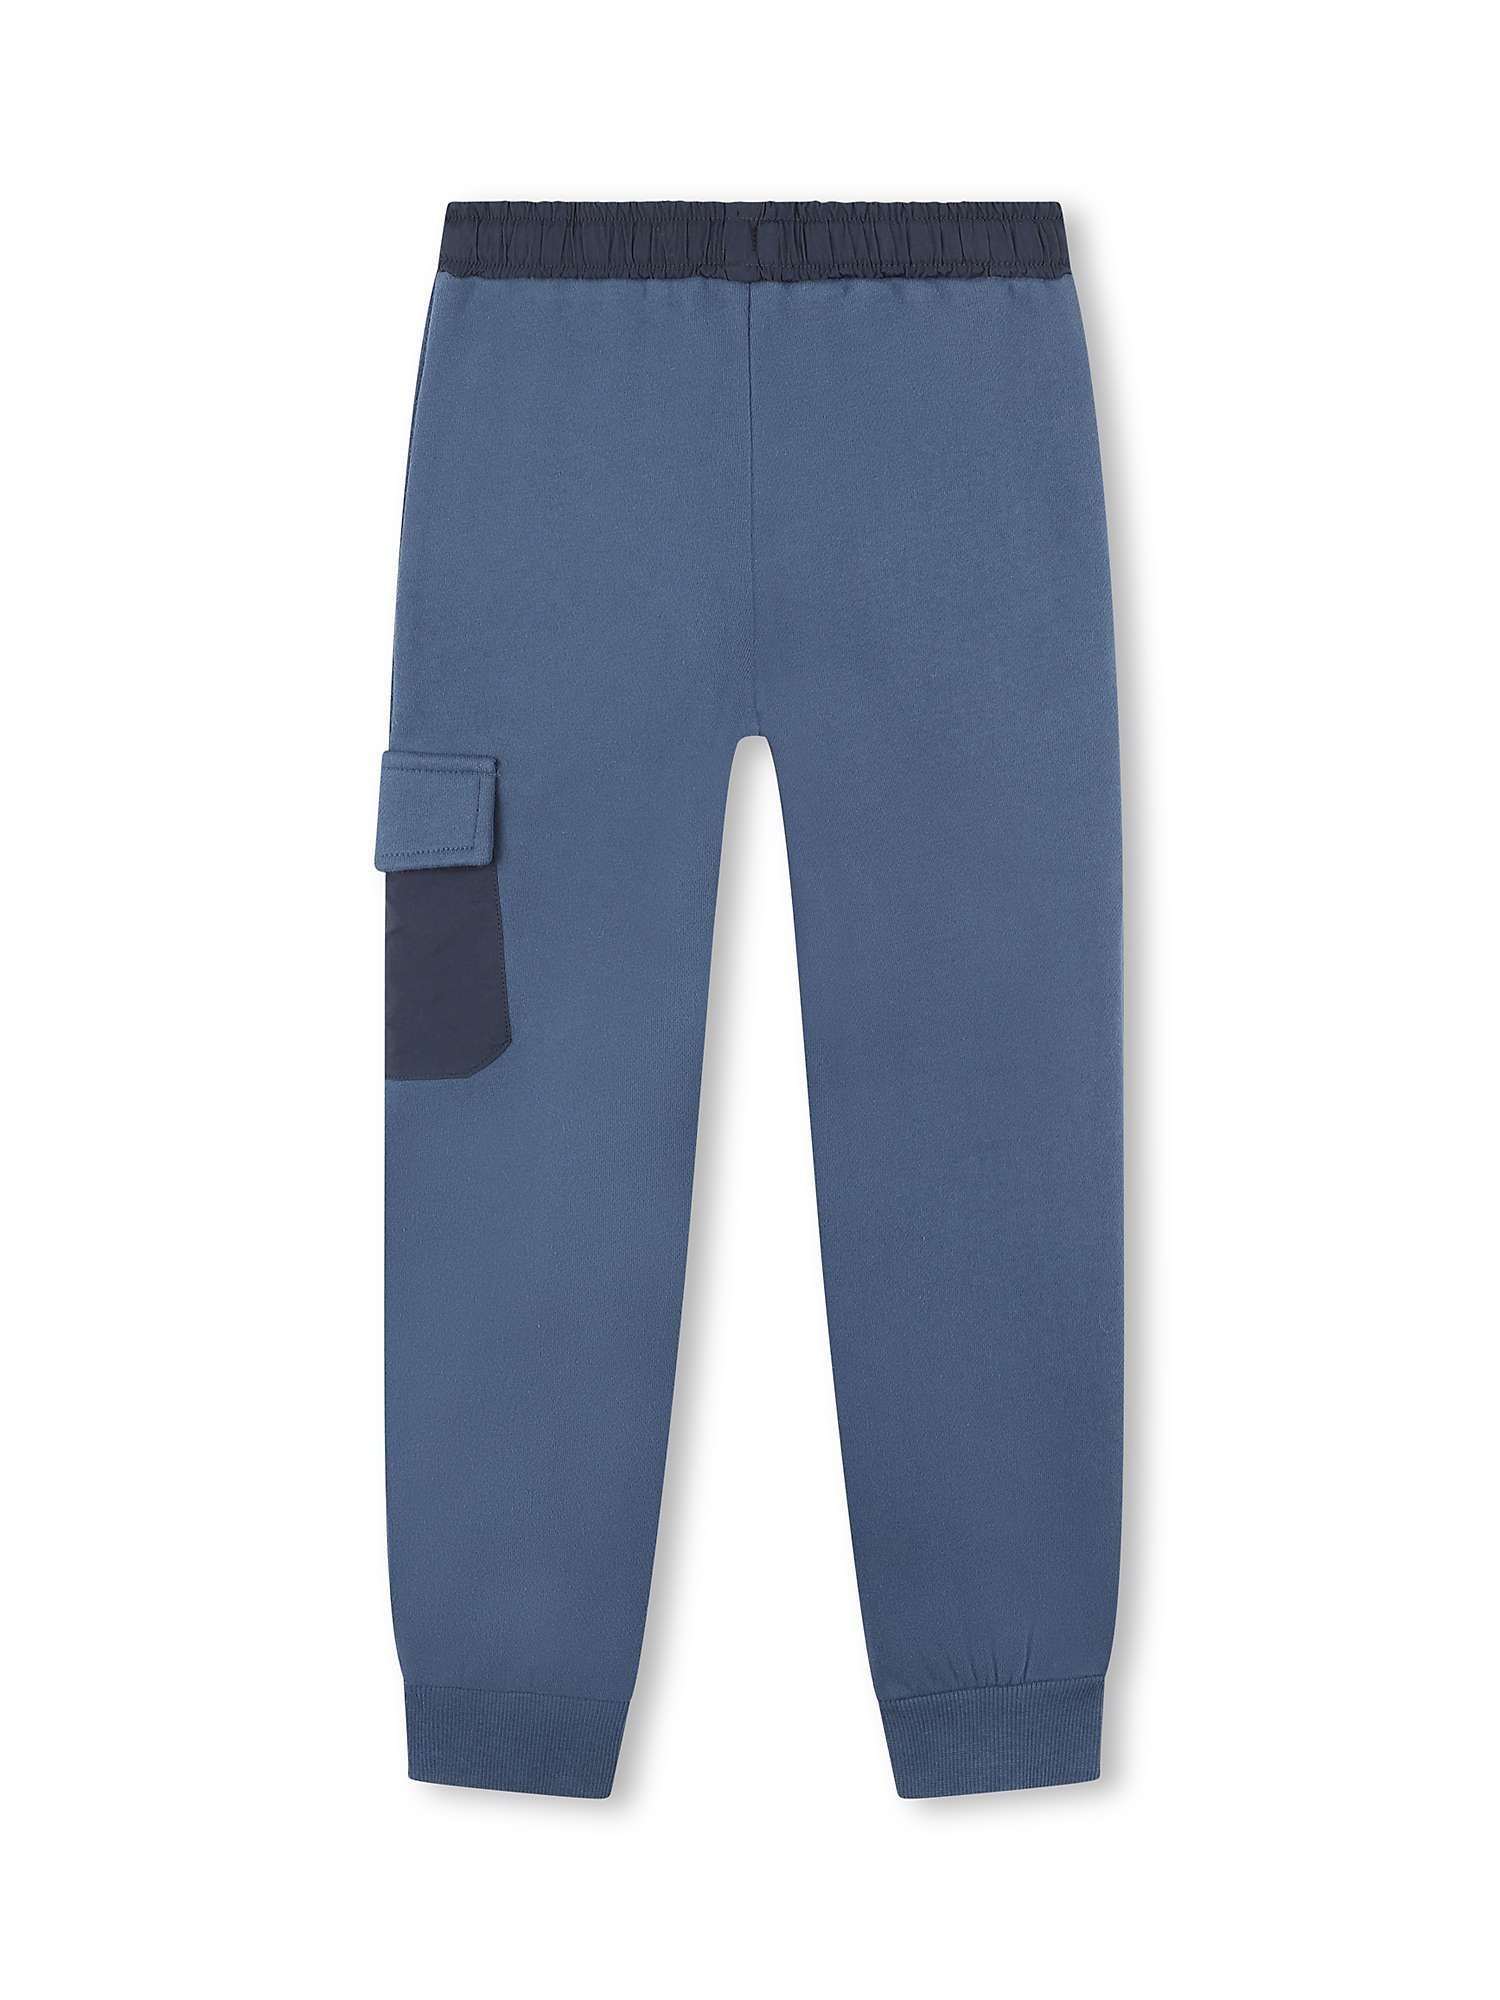 Buy Timberland Kids' French Terry Zip Pocket Jogging Bottoms, Blue/Multi Online at johnlewis.com